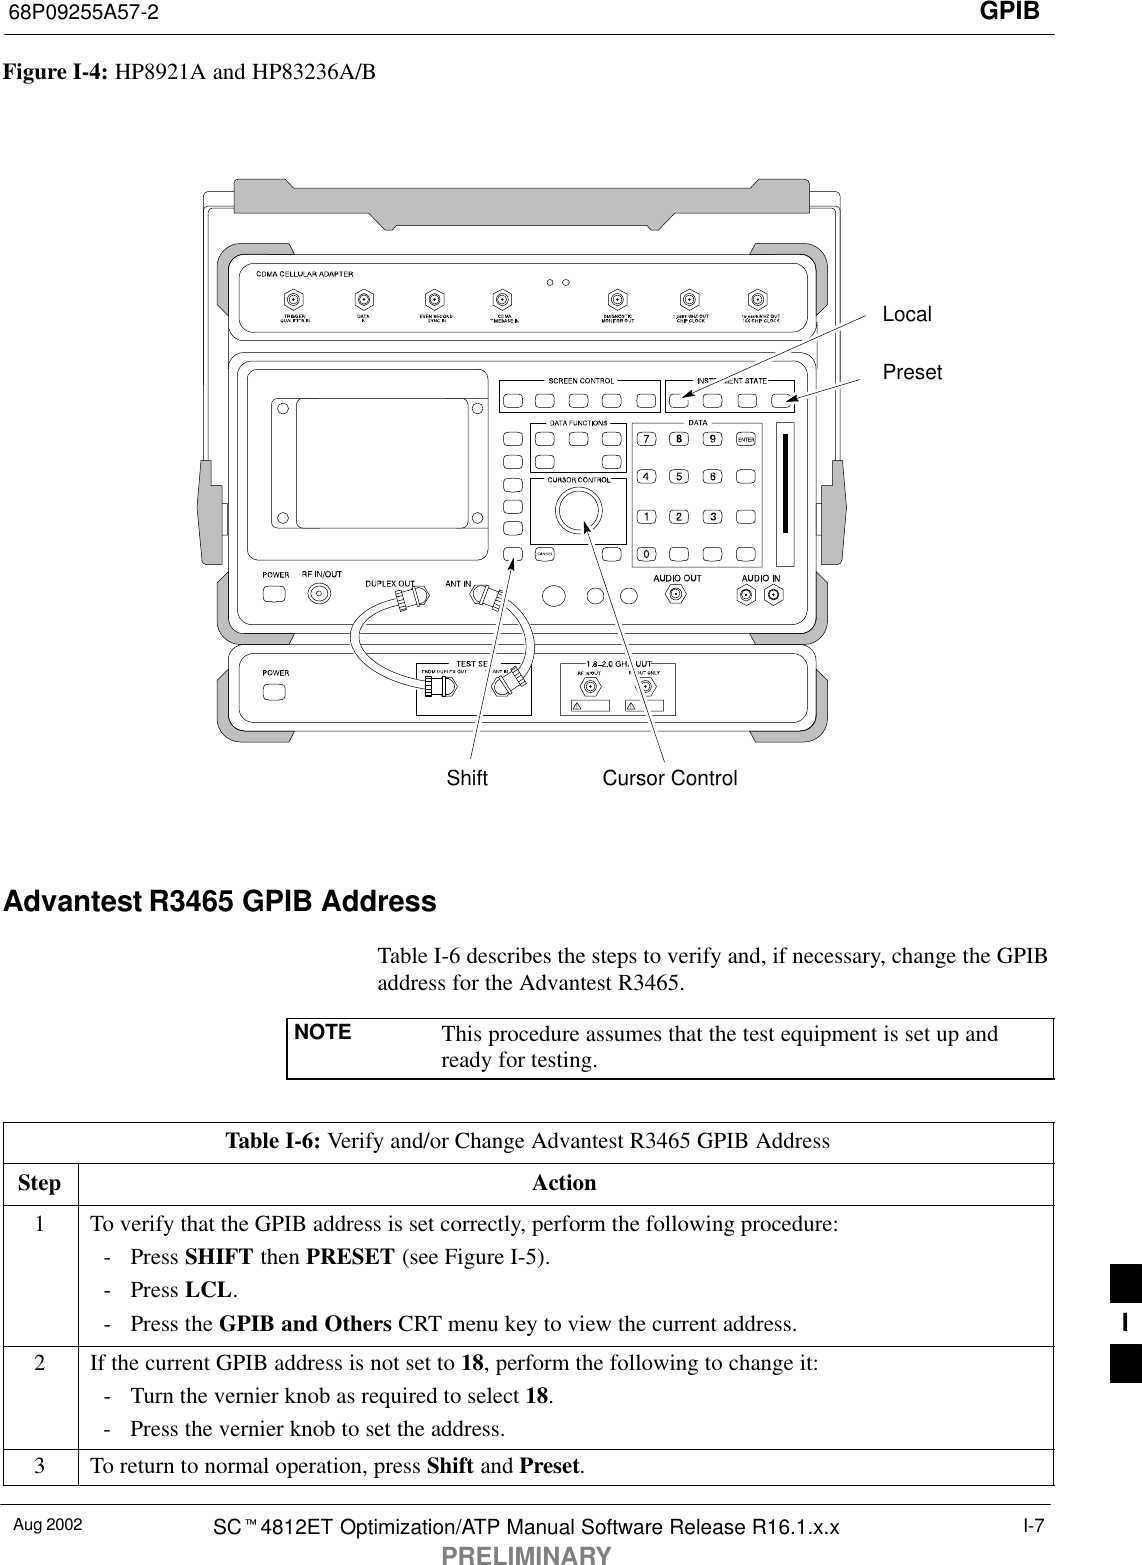 GPIB68P09255A57-2Aug 2002 SCt4812ET Optimization/ATP Manual Software Release R16.1.x.xPRELIMINARYI-7Figure I-4: HP8921A and HP83236A/BPresetCursor ControlShiftLocalAdvantest R3465 GPIB AddressTable I-6 describes the steps to verify and, if necessary, change the GPIBaddress for the Advantest R3465.NOTE This procedure assumes that the test equipment is set up andready for testing.Table I-6: Verify and/or Change Advantest R3465 GPIB AddressStep Action1To verify that the GPIB address is set correctly, perform the following procedure:- Press SHIFT then PRESET (see Figure I-5).- Press LCL.- Press the GPIB and Others CRT menu key to view the current address.2If the current GPIB address is not set to 18, perform the following to change it:- Turn the vernier knob as required to select 18.- Press the vernier knob to set the address.3To return to normal operation, press Shift and Preset.I